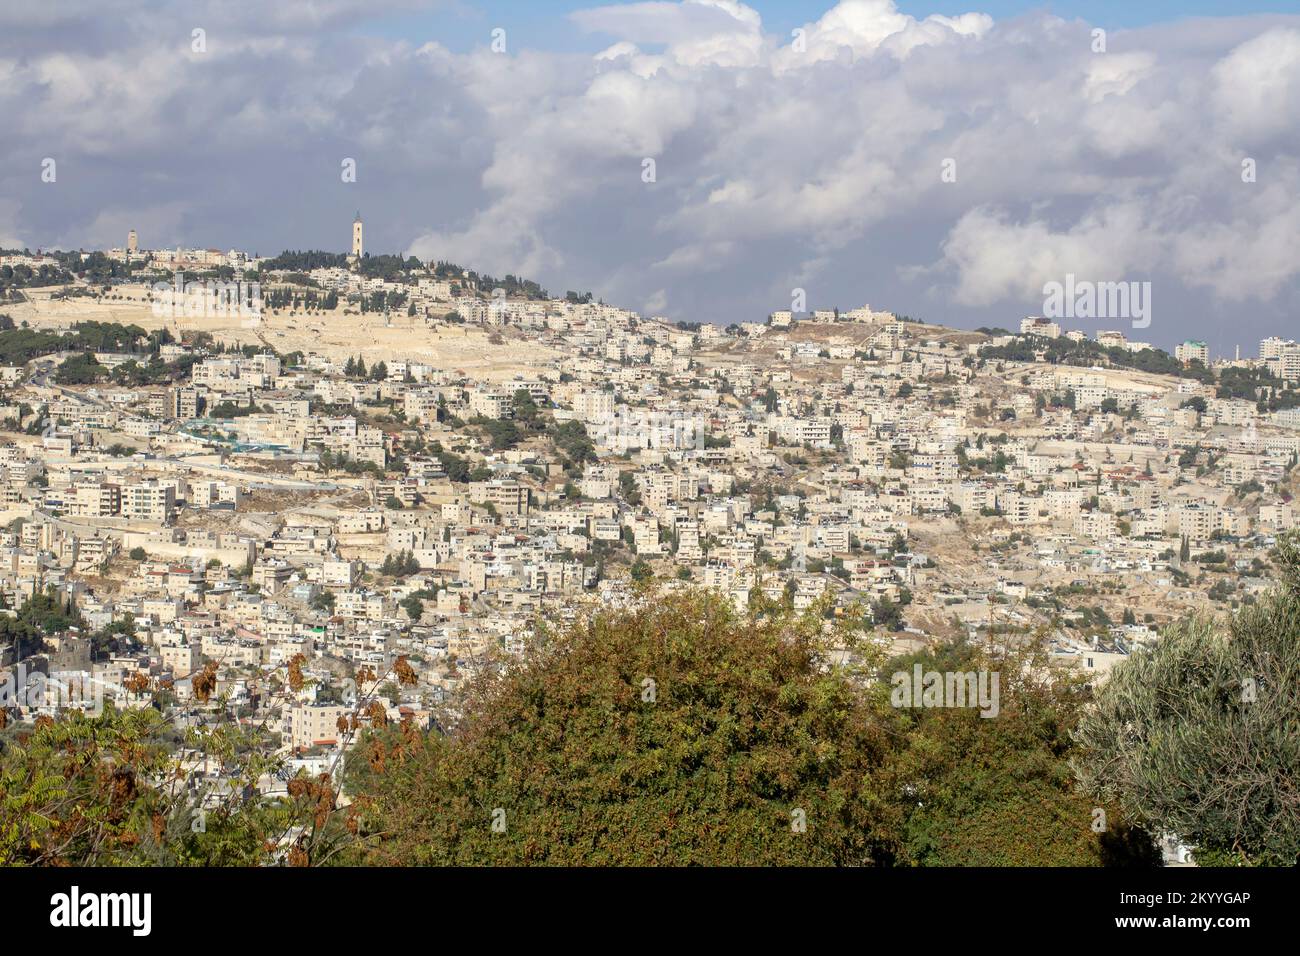 7 Nov 2022 A view of The Mount of Olives a place of great significance in Judaism. Taken from the South side of the Temple Mount in Jerusalem Israel Stock Photo